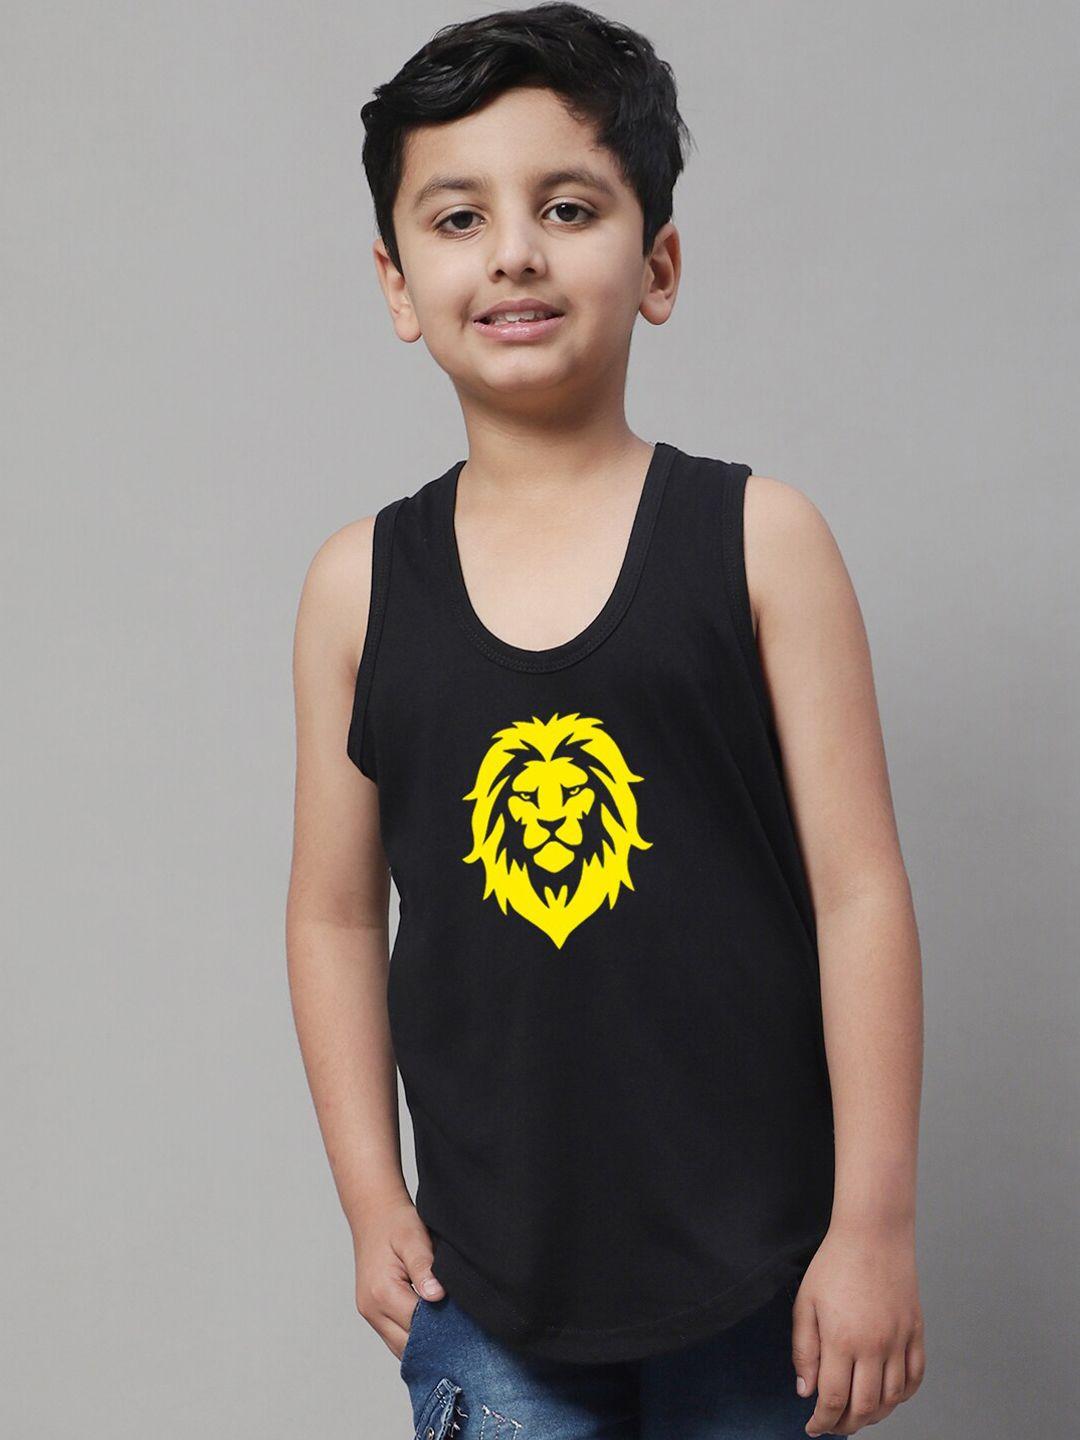 Friskers Boys Printed Pure Cotton Innerwear Vests